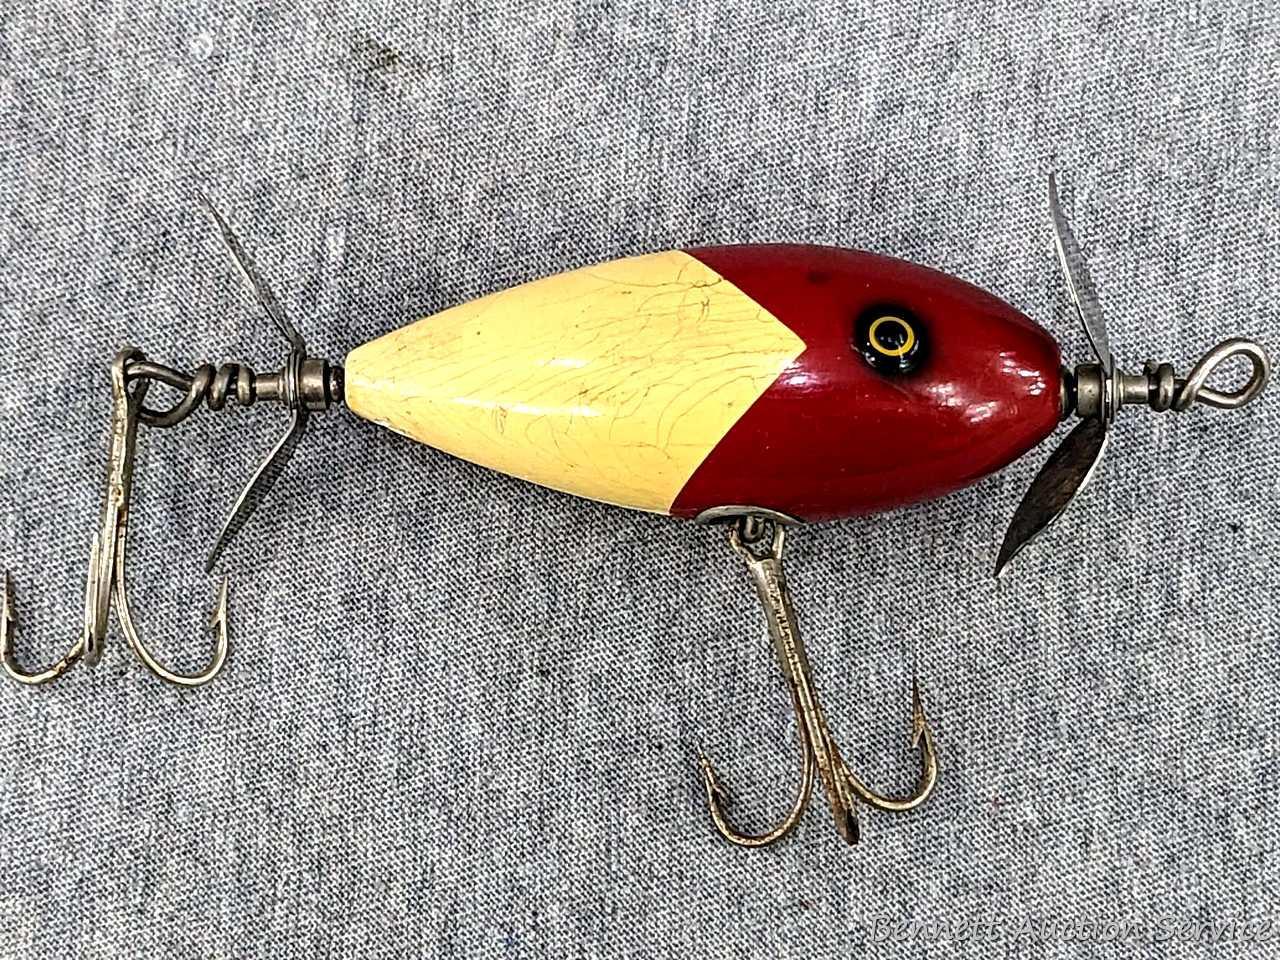 Antique South Bend Surf-Oreno fishing lure is